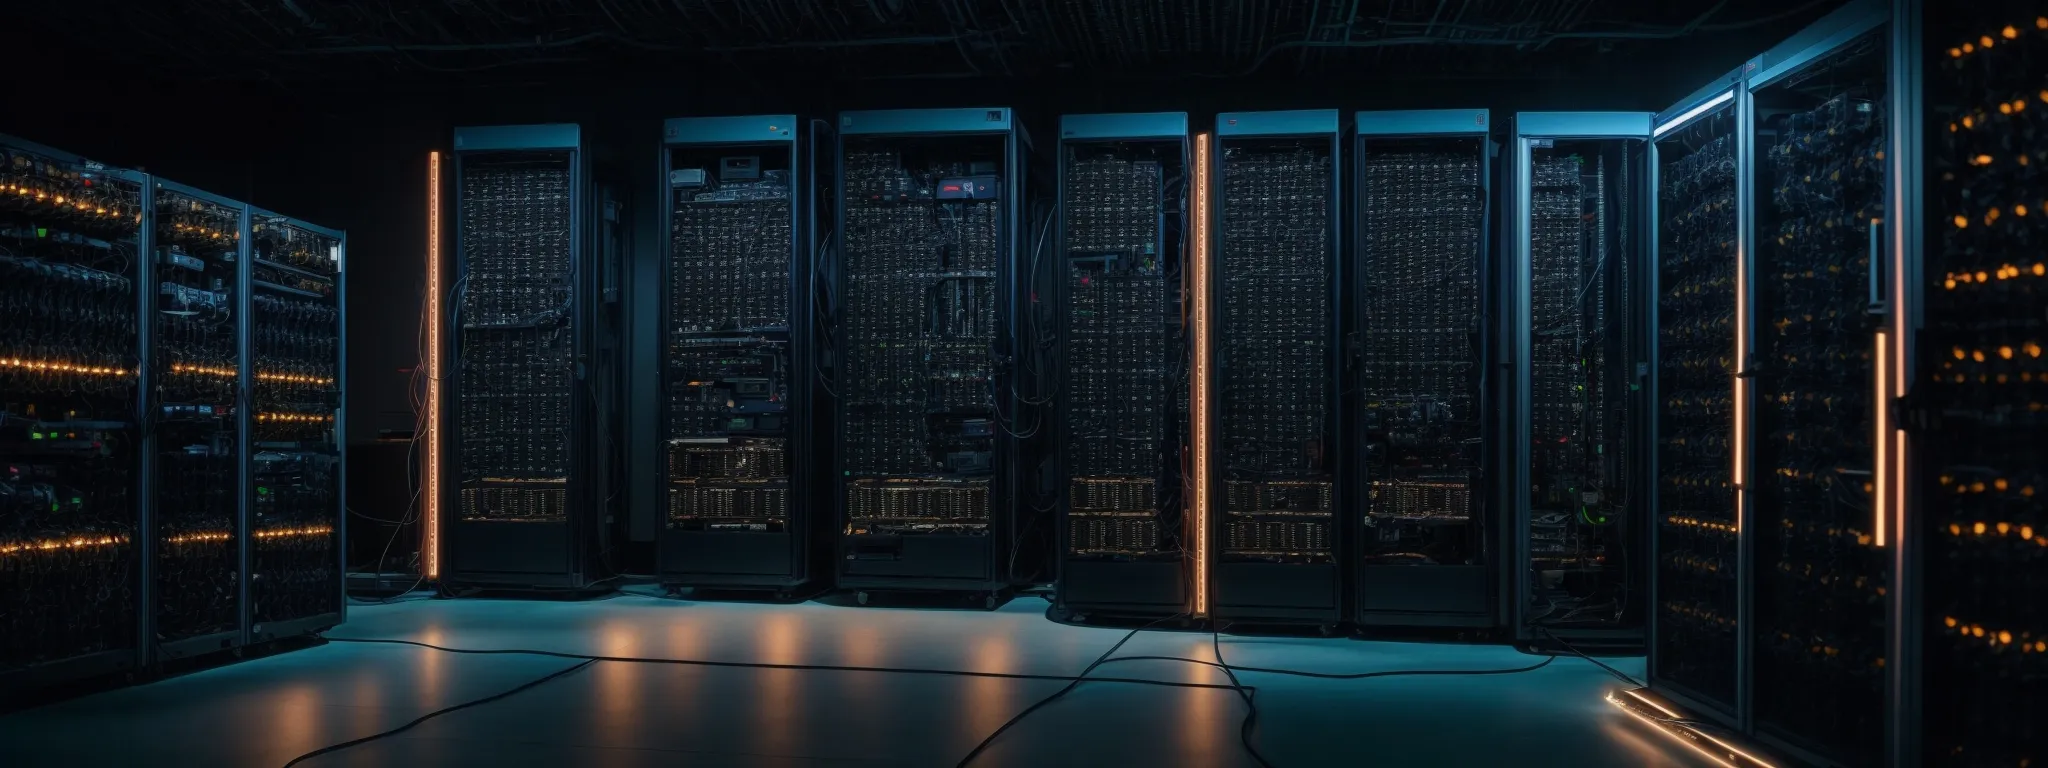 a wide-angle view of a server room with rows of glowing equipment indicating high-tech data processing for seo optimization.